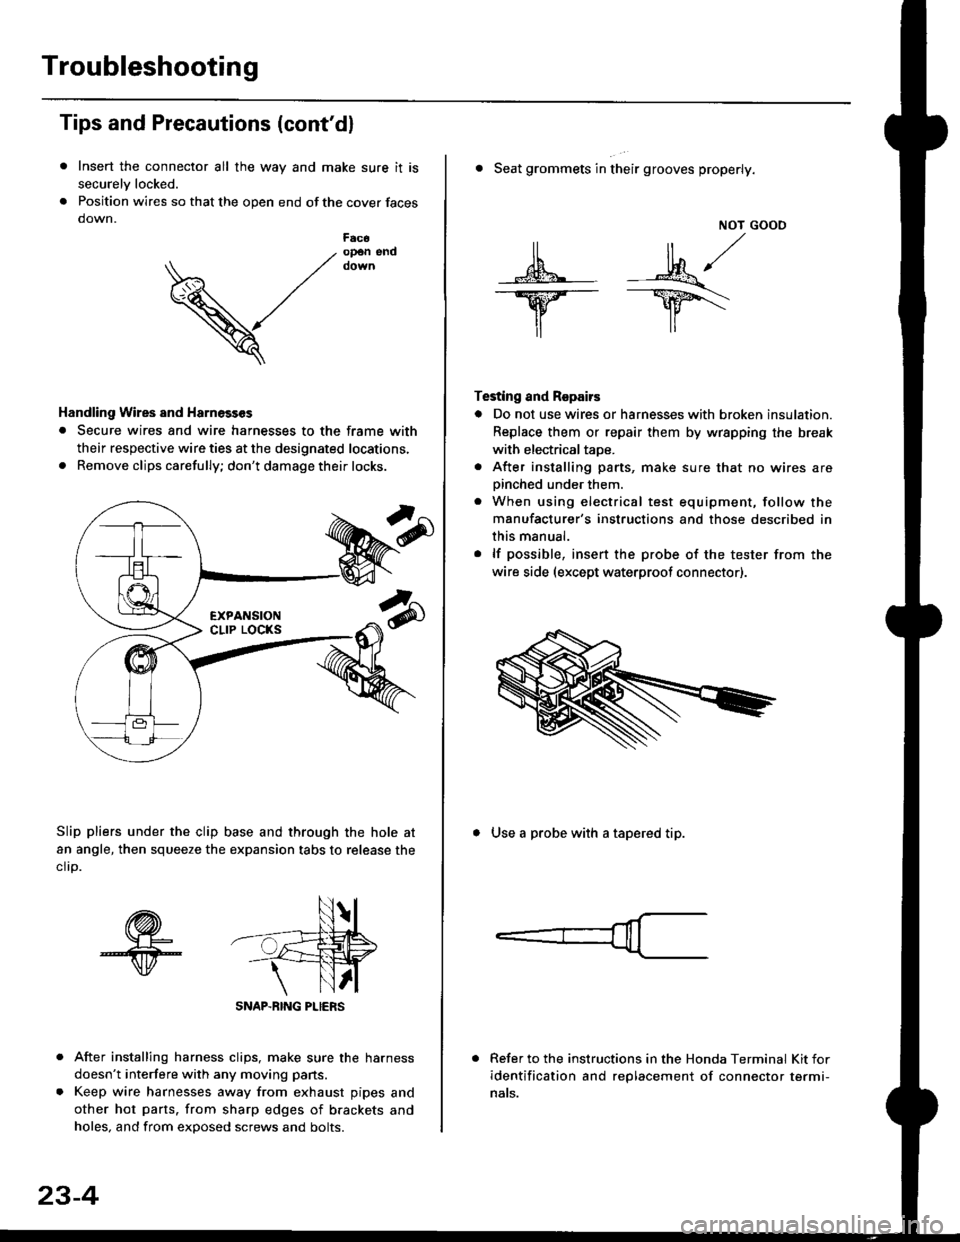 HONDA CIVIC 1997 6.G Workshop Manual Troubleshooting
Tips and Precautions (contdl
Insert the connector all the way and make sure it is
securelv locked.
Position wires so that the open end of the cover faces
down.
After installing harnes